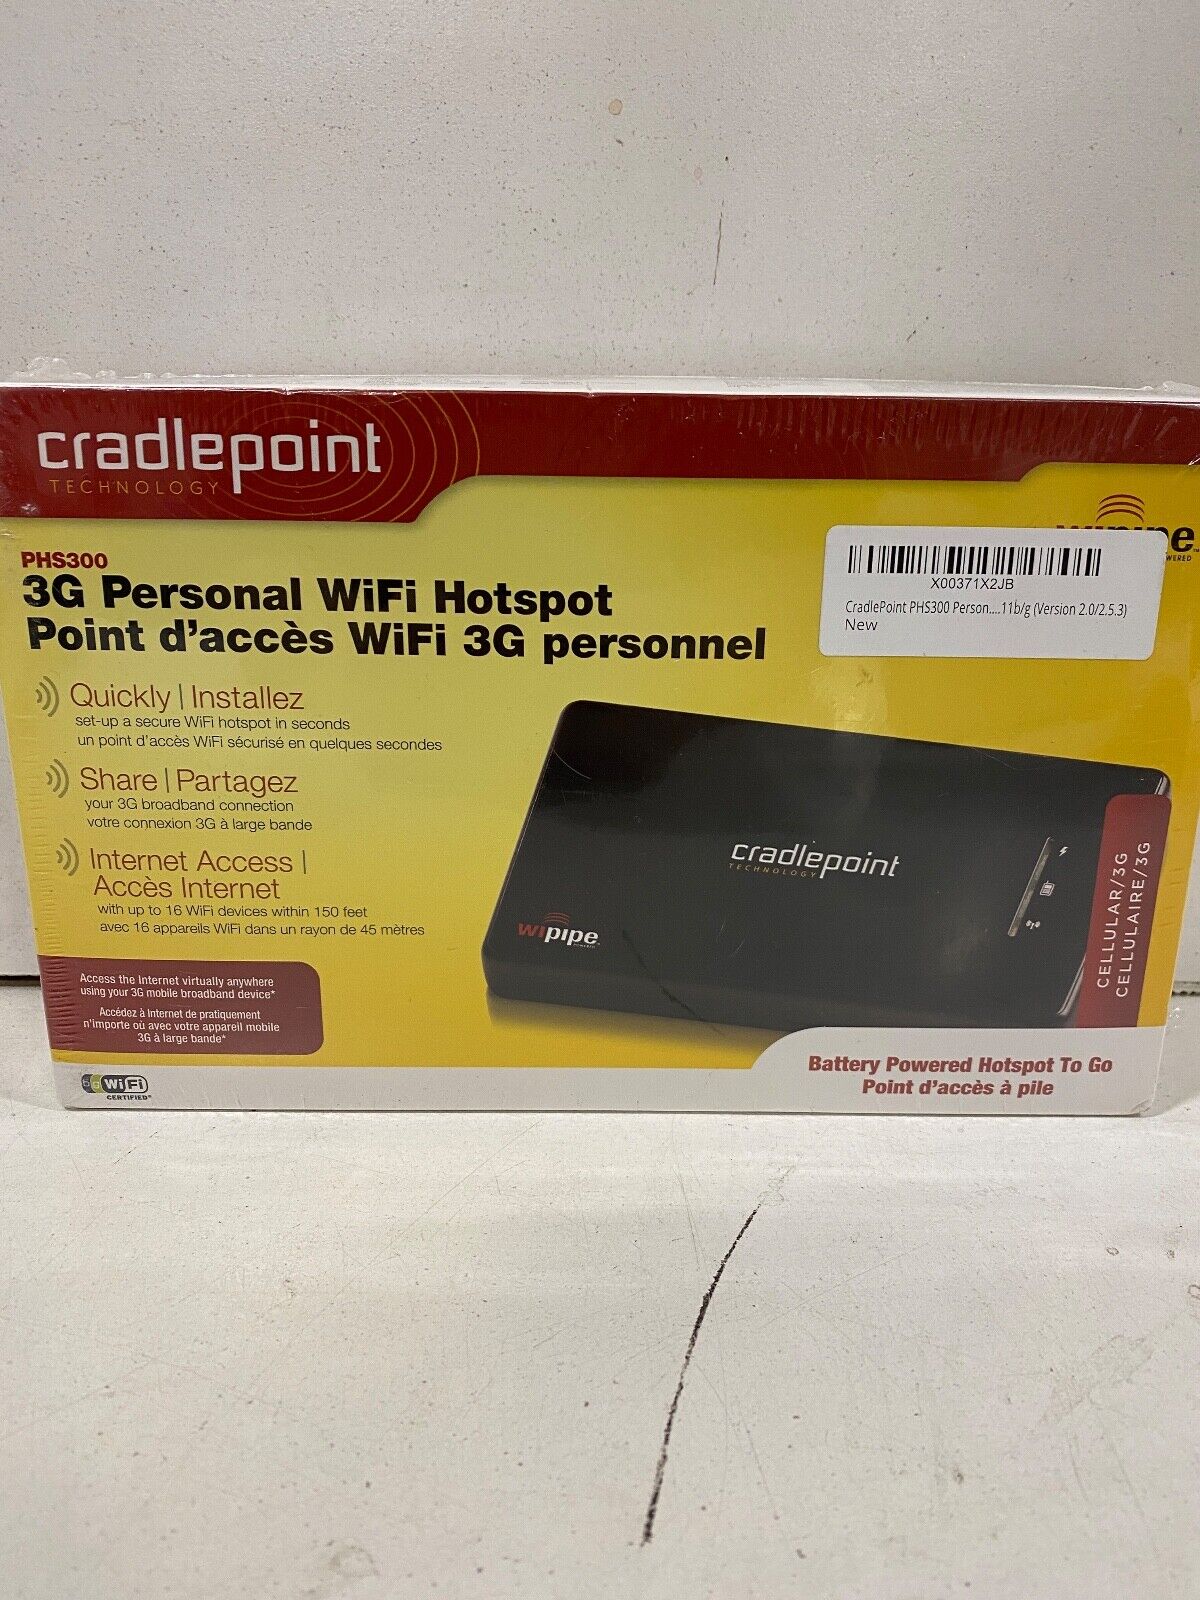 Cradlepoint PHS300 Battery Powered 3G/4G Personal WiFi Hotspot New In Box Sealed